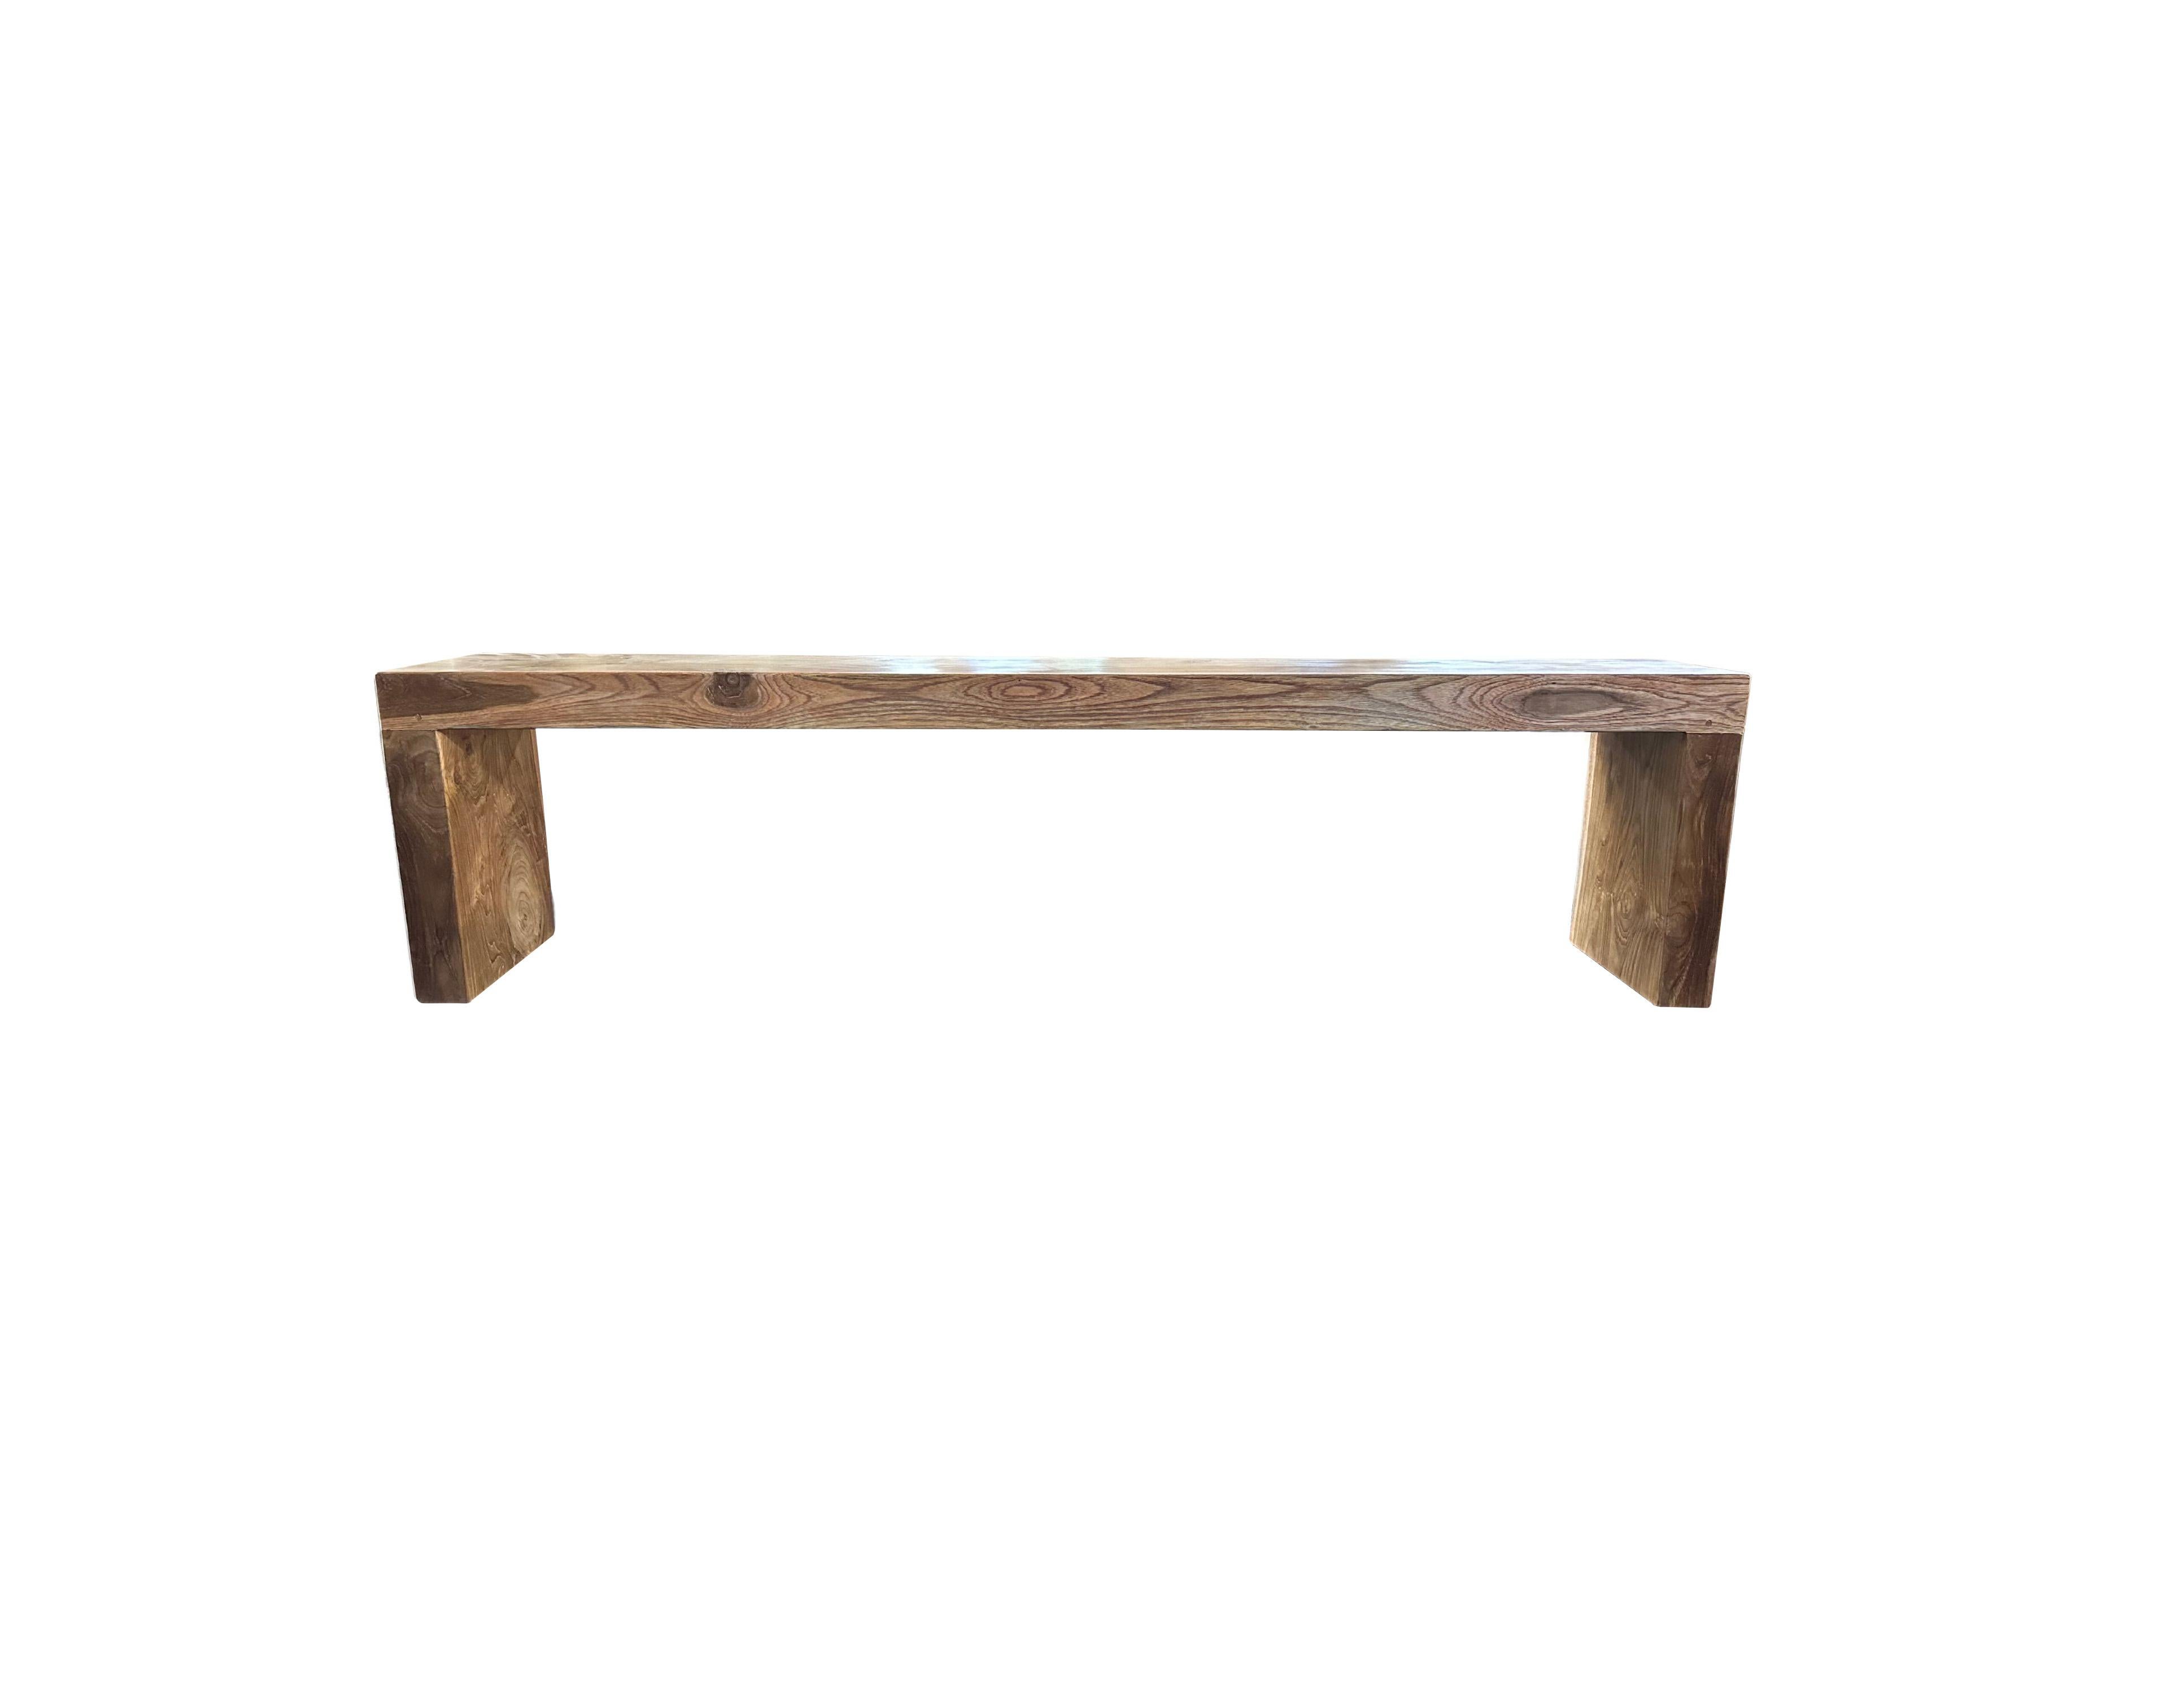 A sculptural hand-carved teak wood bench, a wonderful addition to bring warmth any space.  The table is hand-carved by local artisans using joinery techniques without the use of nails. This bench features an elegant mix of wood textures and shades.